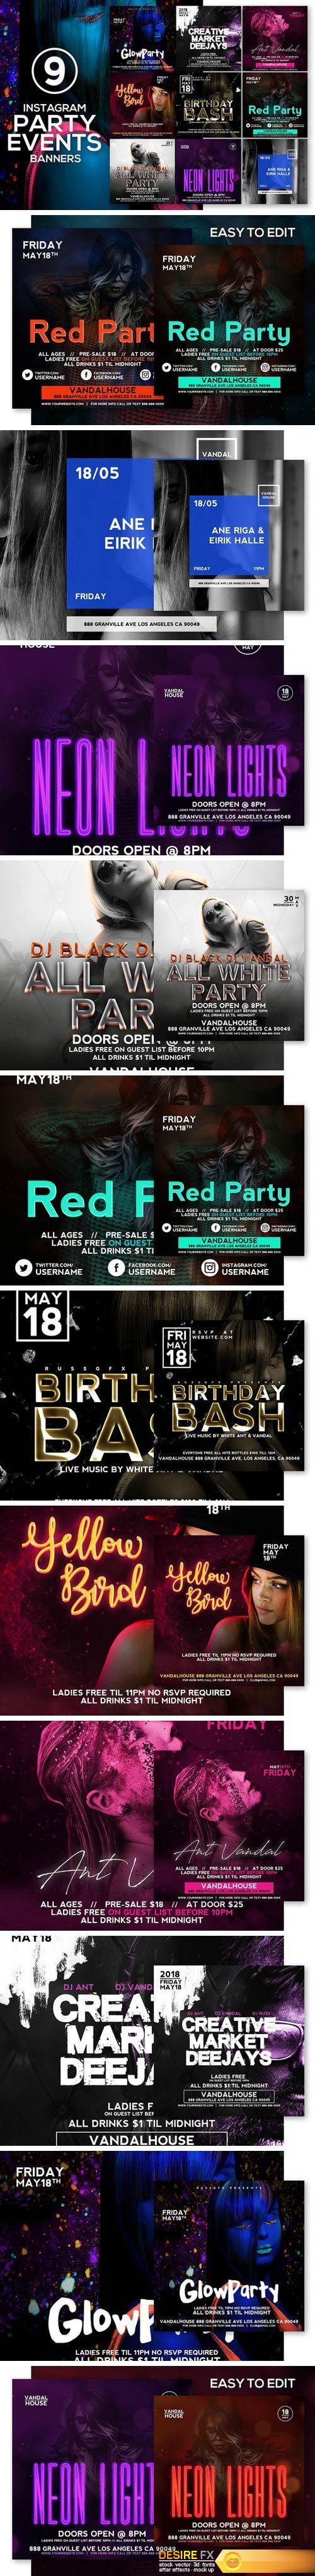 CM - 9 Instagram Party/Events Banners 2040499